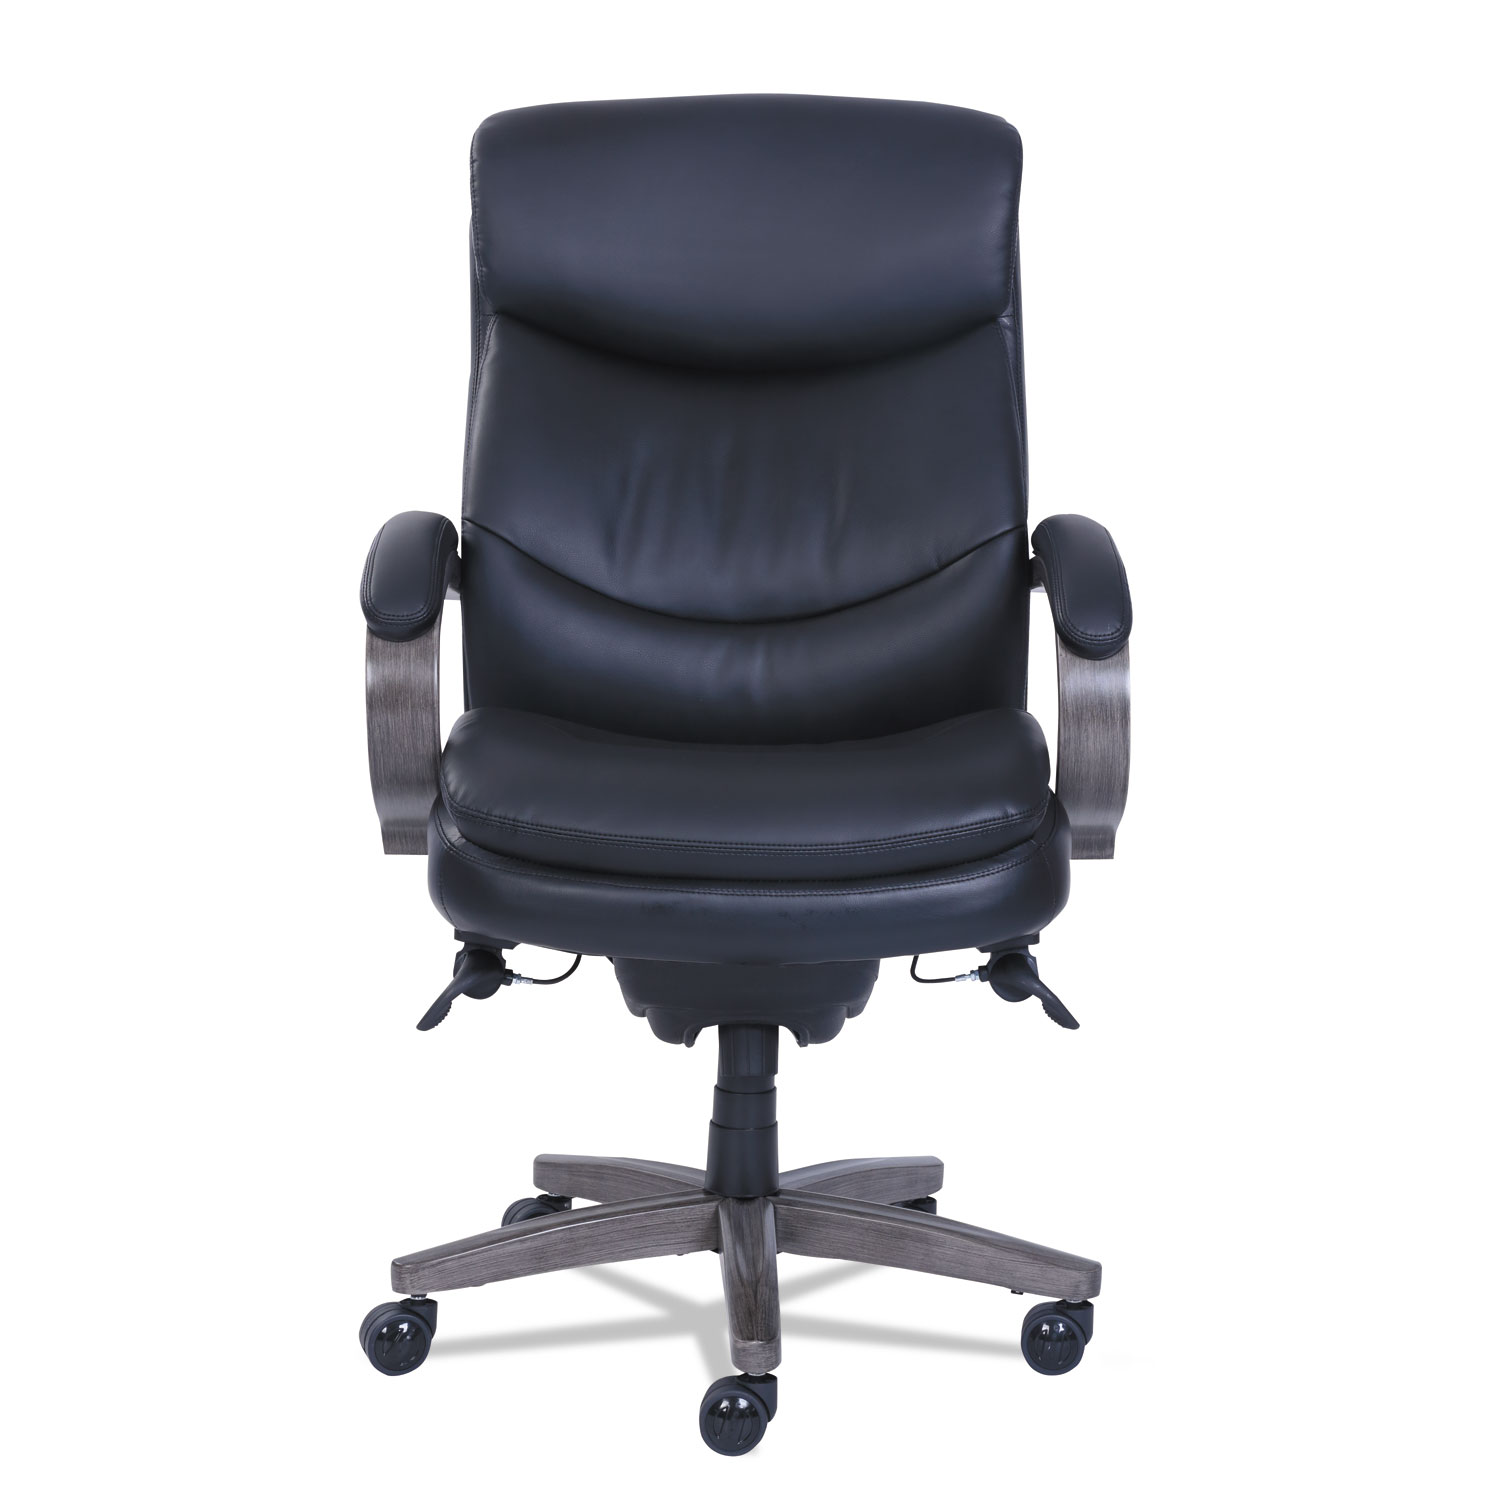 Woodbury High-Back Executive Chair, Supports up to 300 lbs., Black Seat/Black Back, Weathered Gray Base